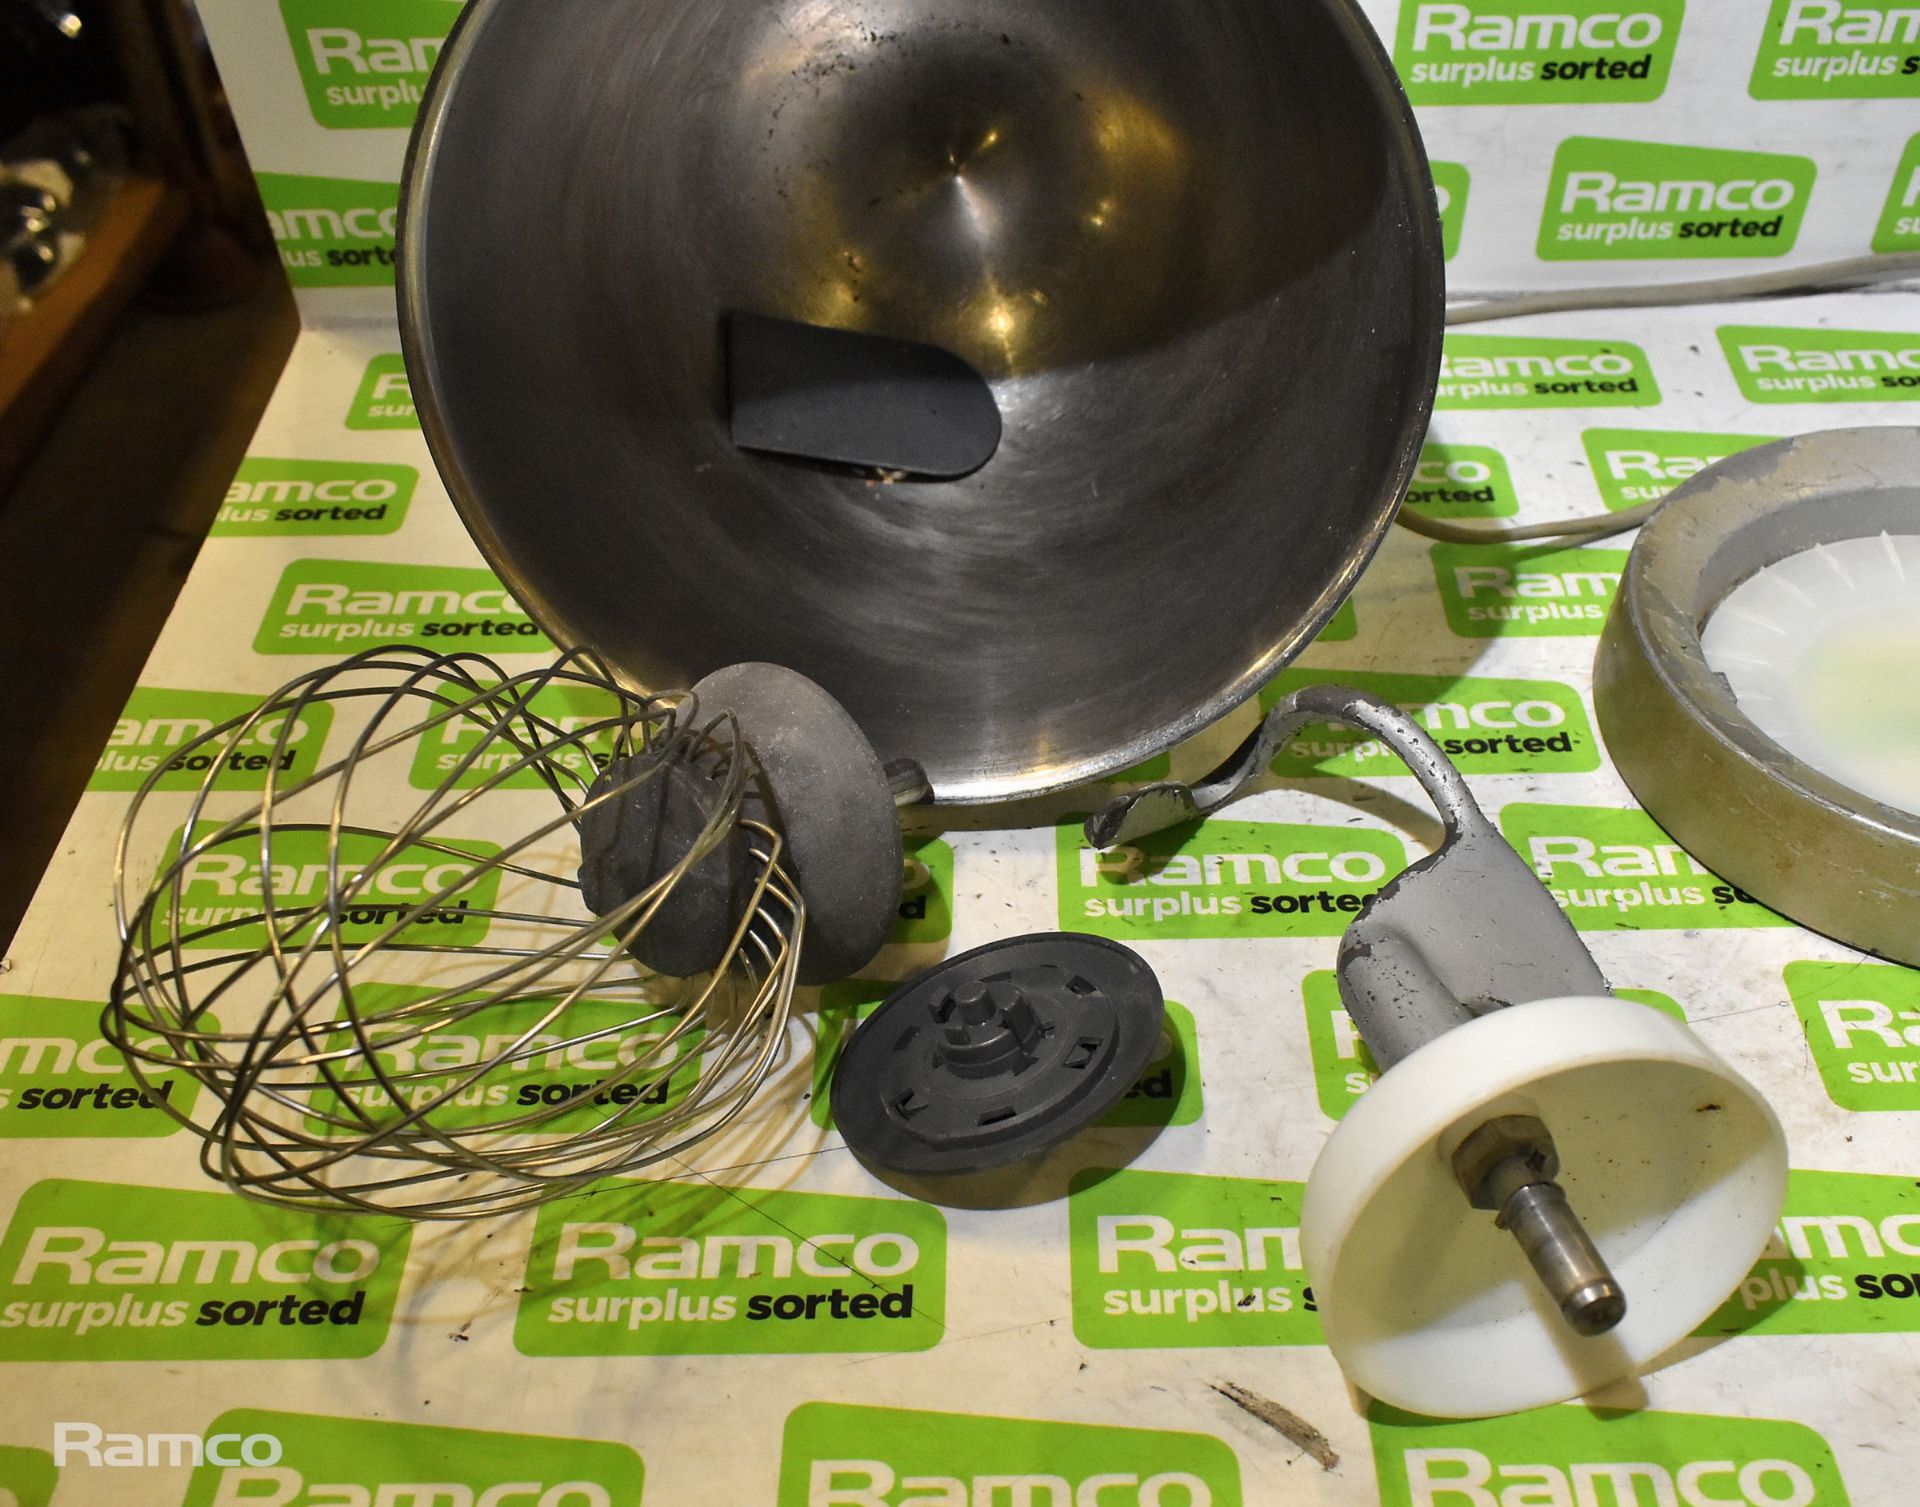 Kenwood Major Classic KM800 mixer with bowl and attachments - SPARES OR REPAIRS - Image 4 of 6